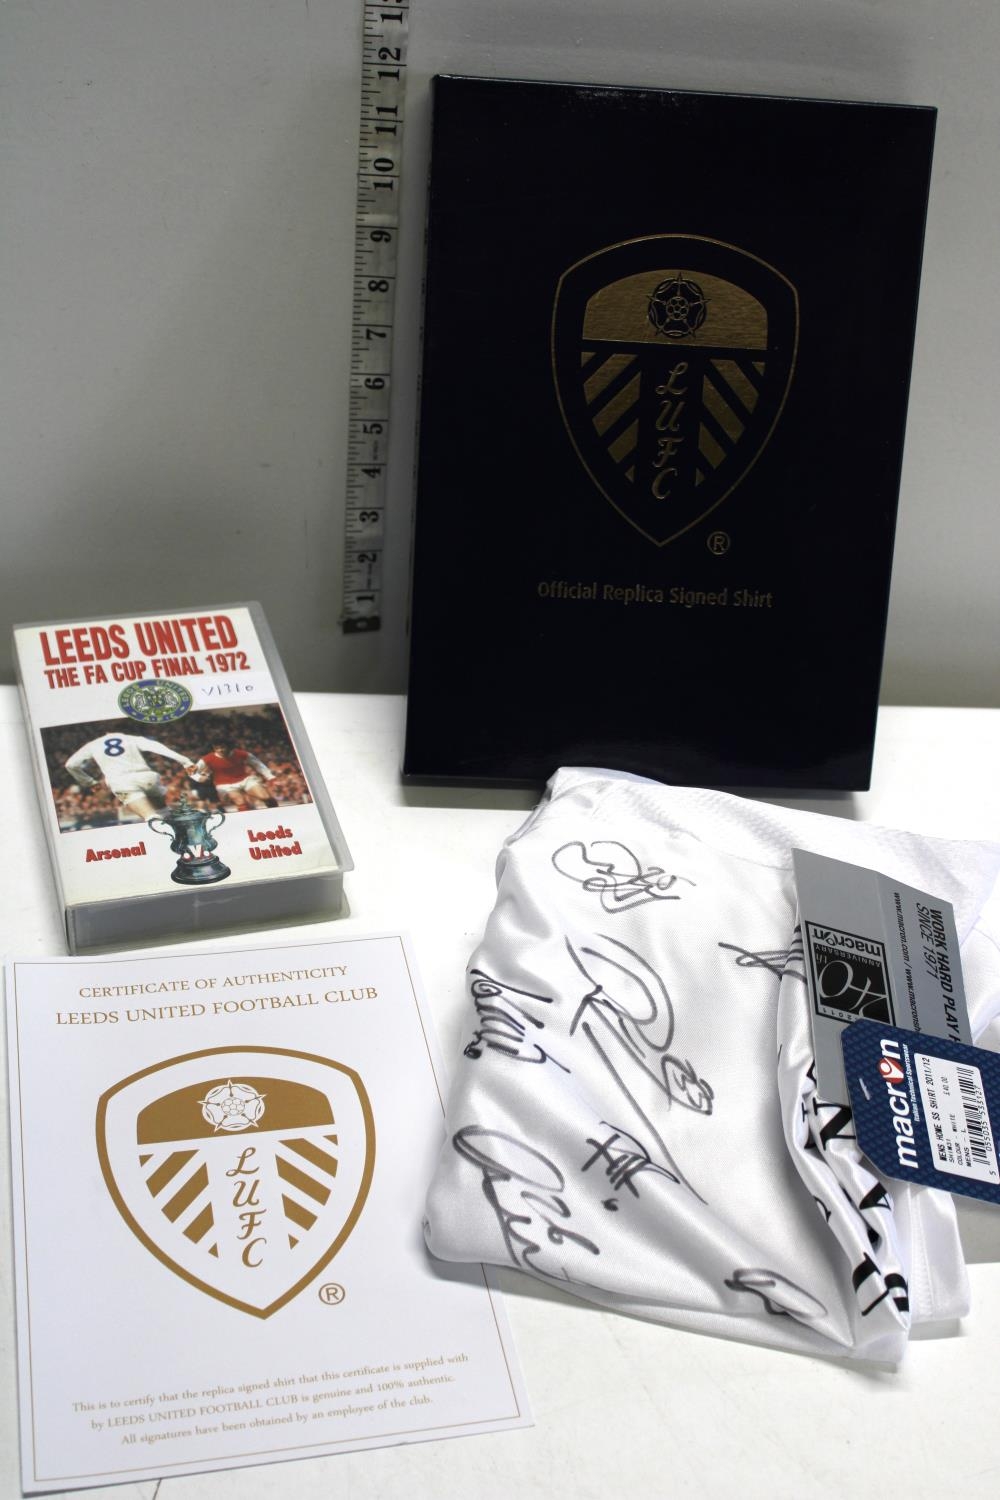 A Leeds United 1972 FA cup final VHS and a Leeds United replica football shirts with COA